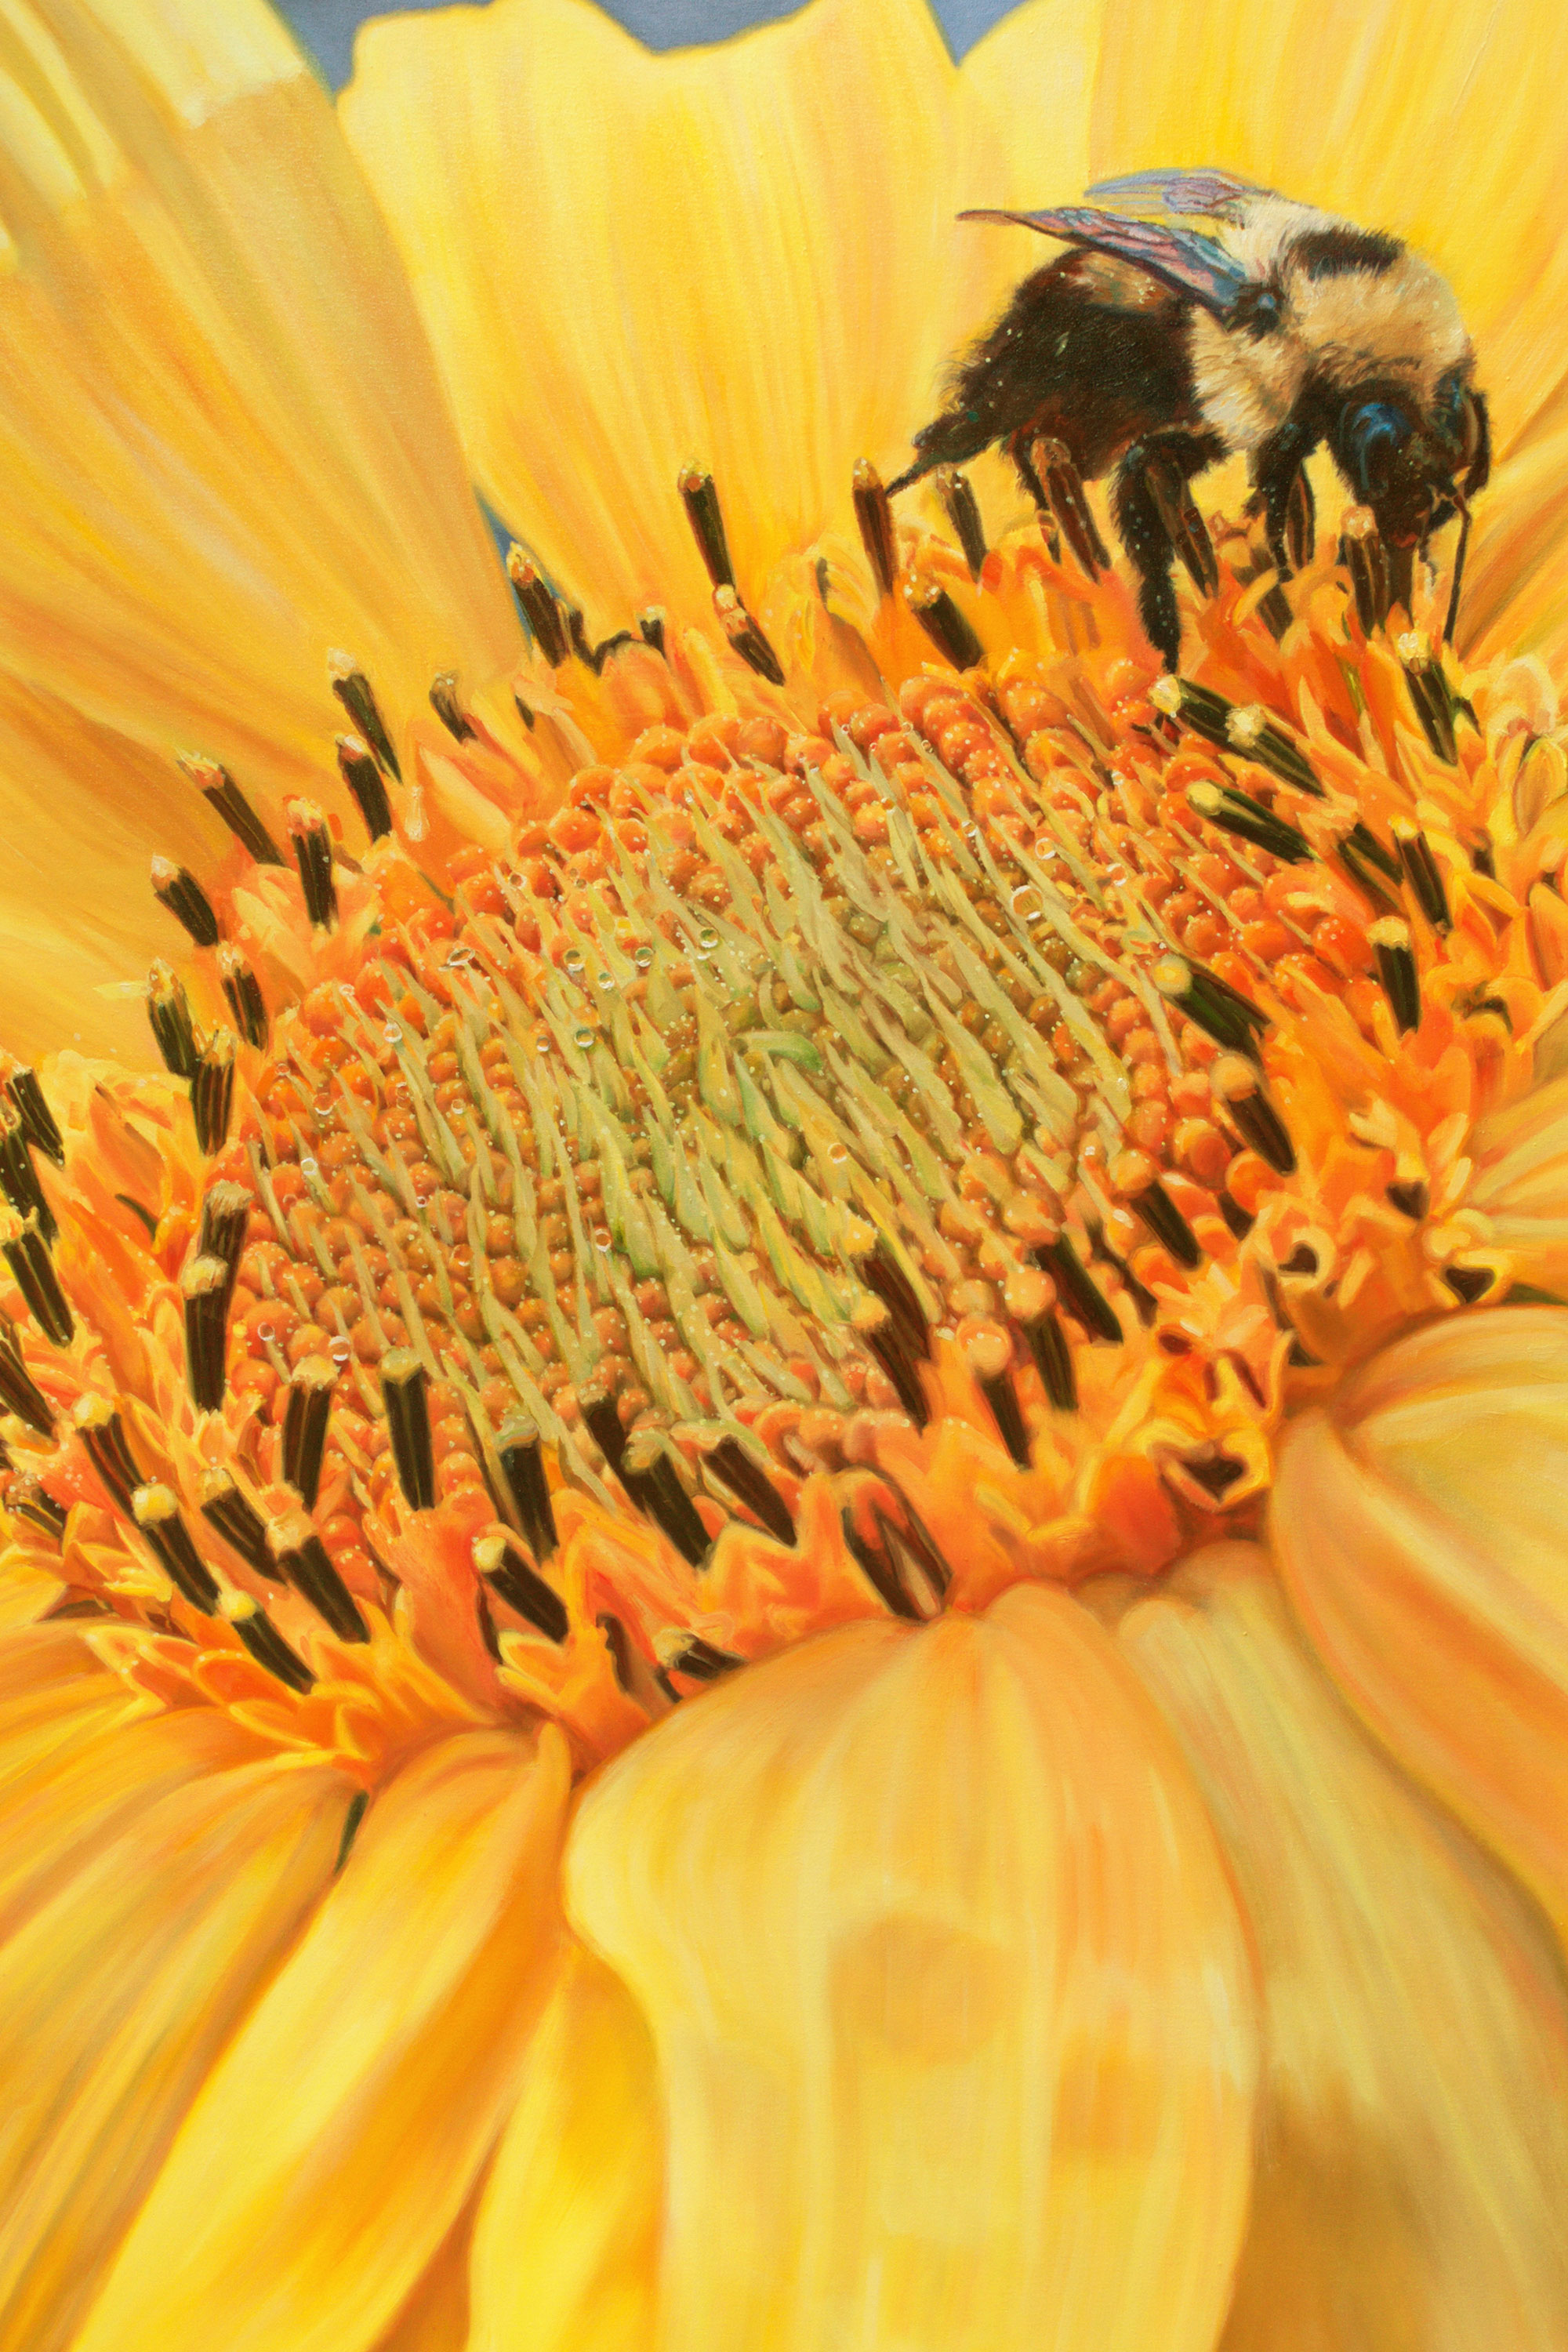 Painting of bumblebee on sunflower.